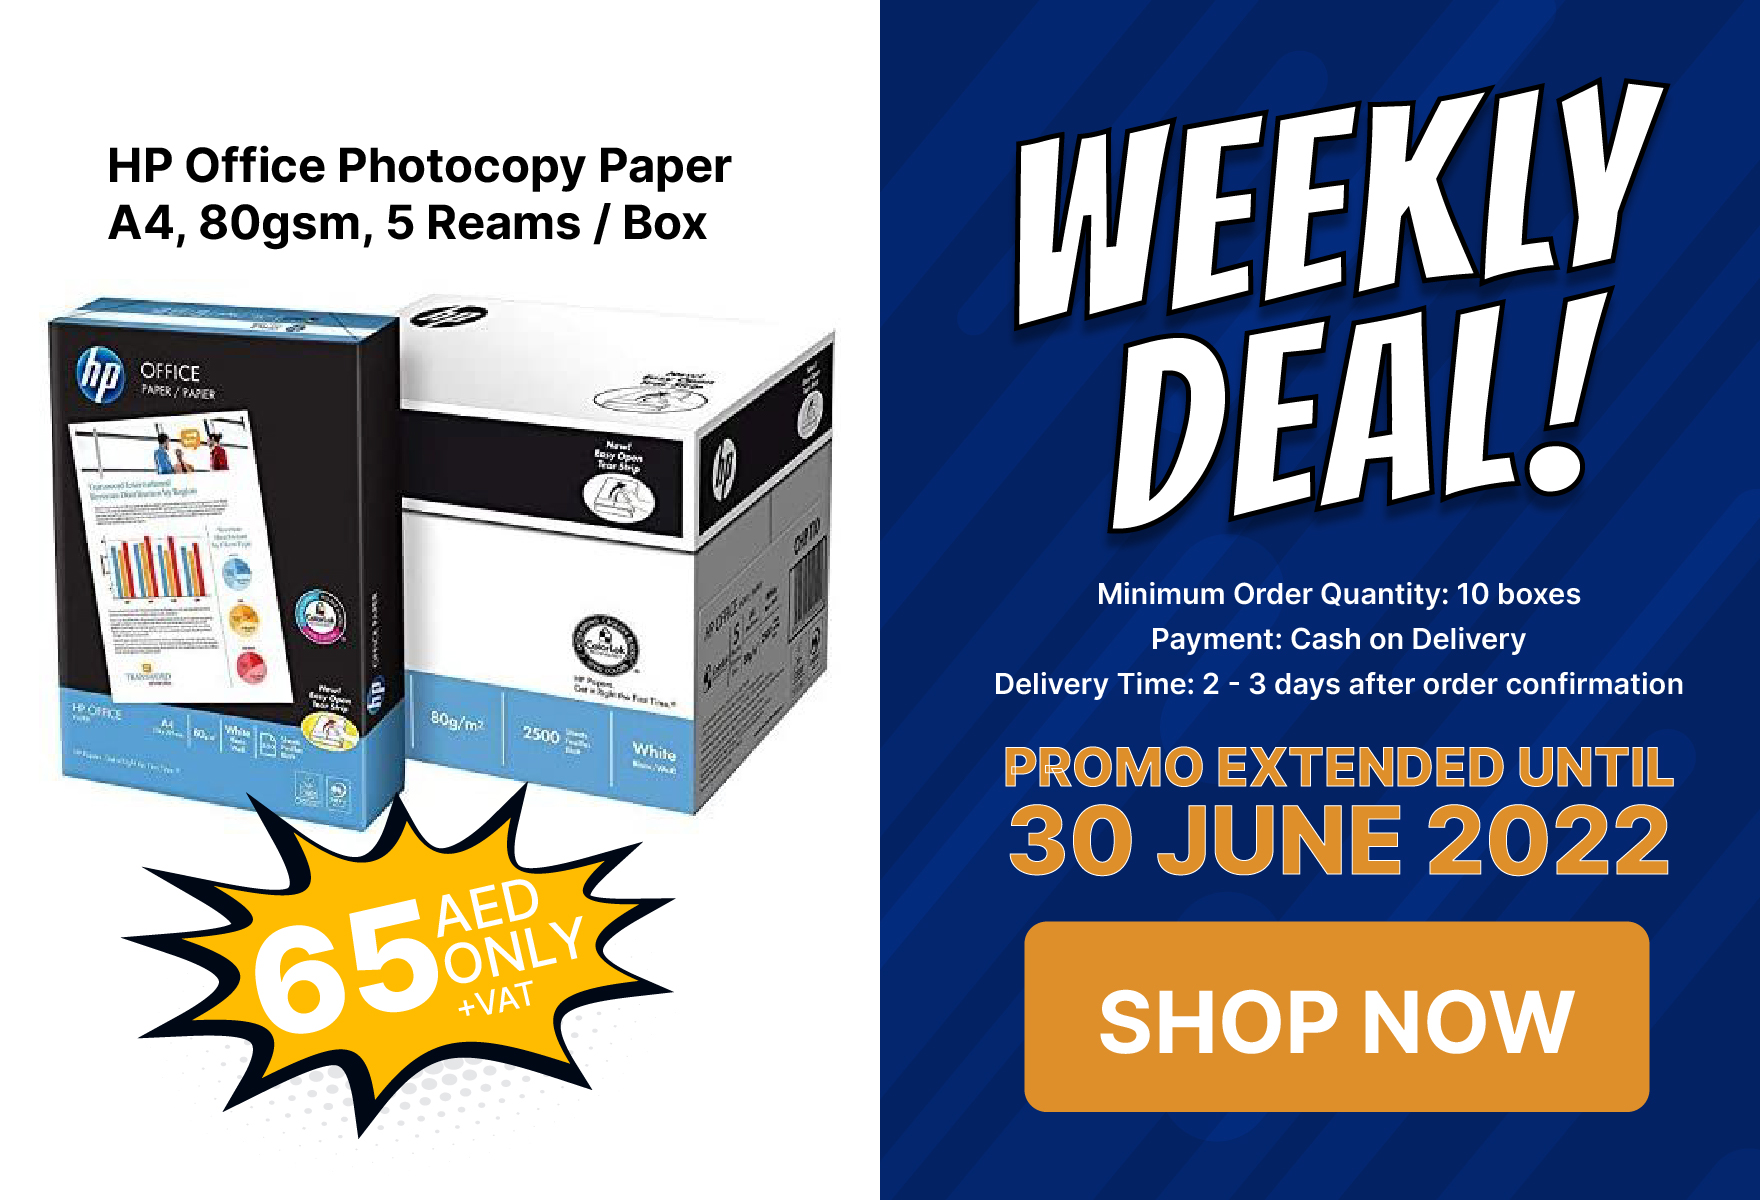 HP Office Photocopy Paper - A4, 80gsm, 5 Ream / Box Offer